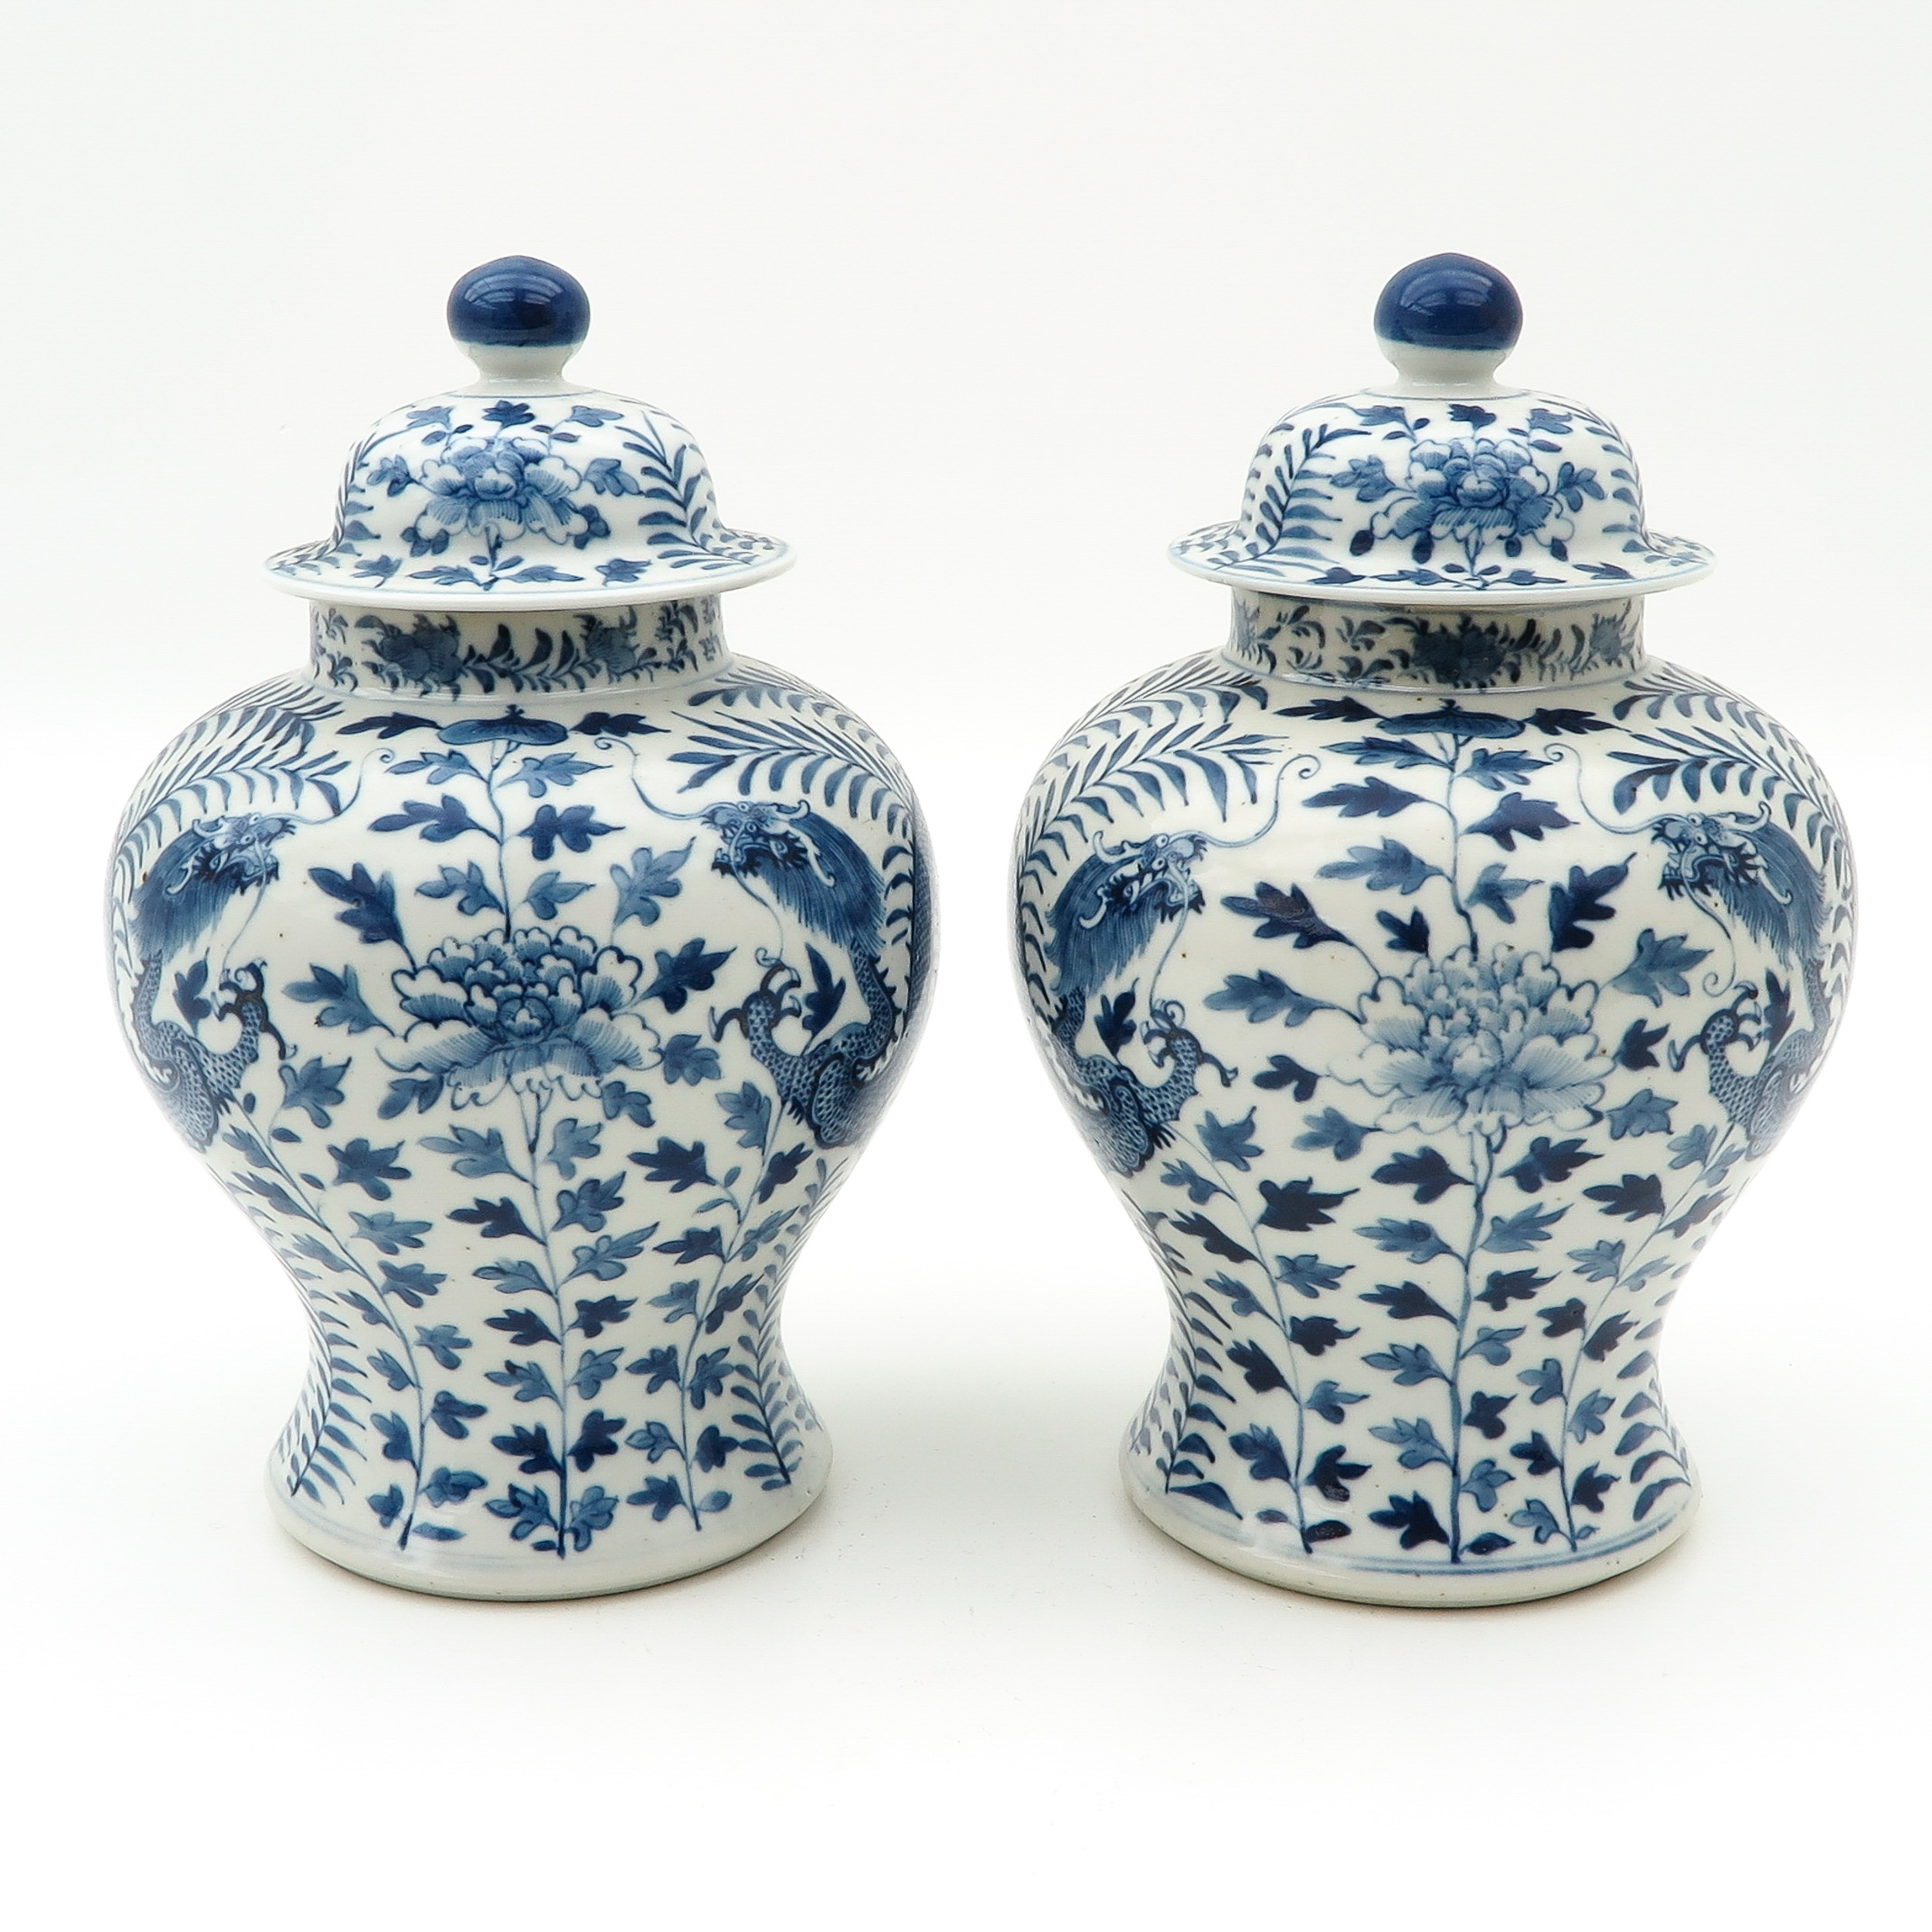 A Pair of Temple Jars with Covers